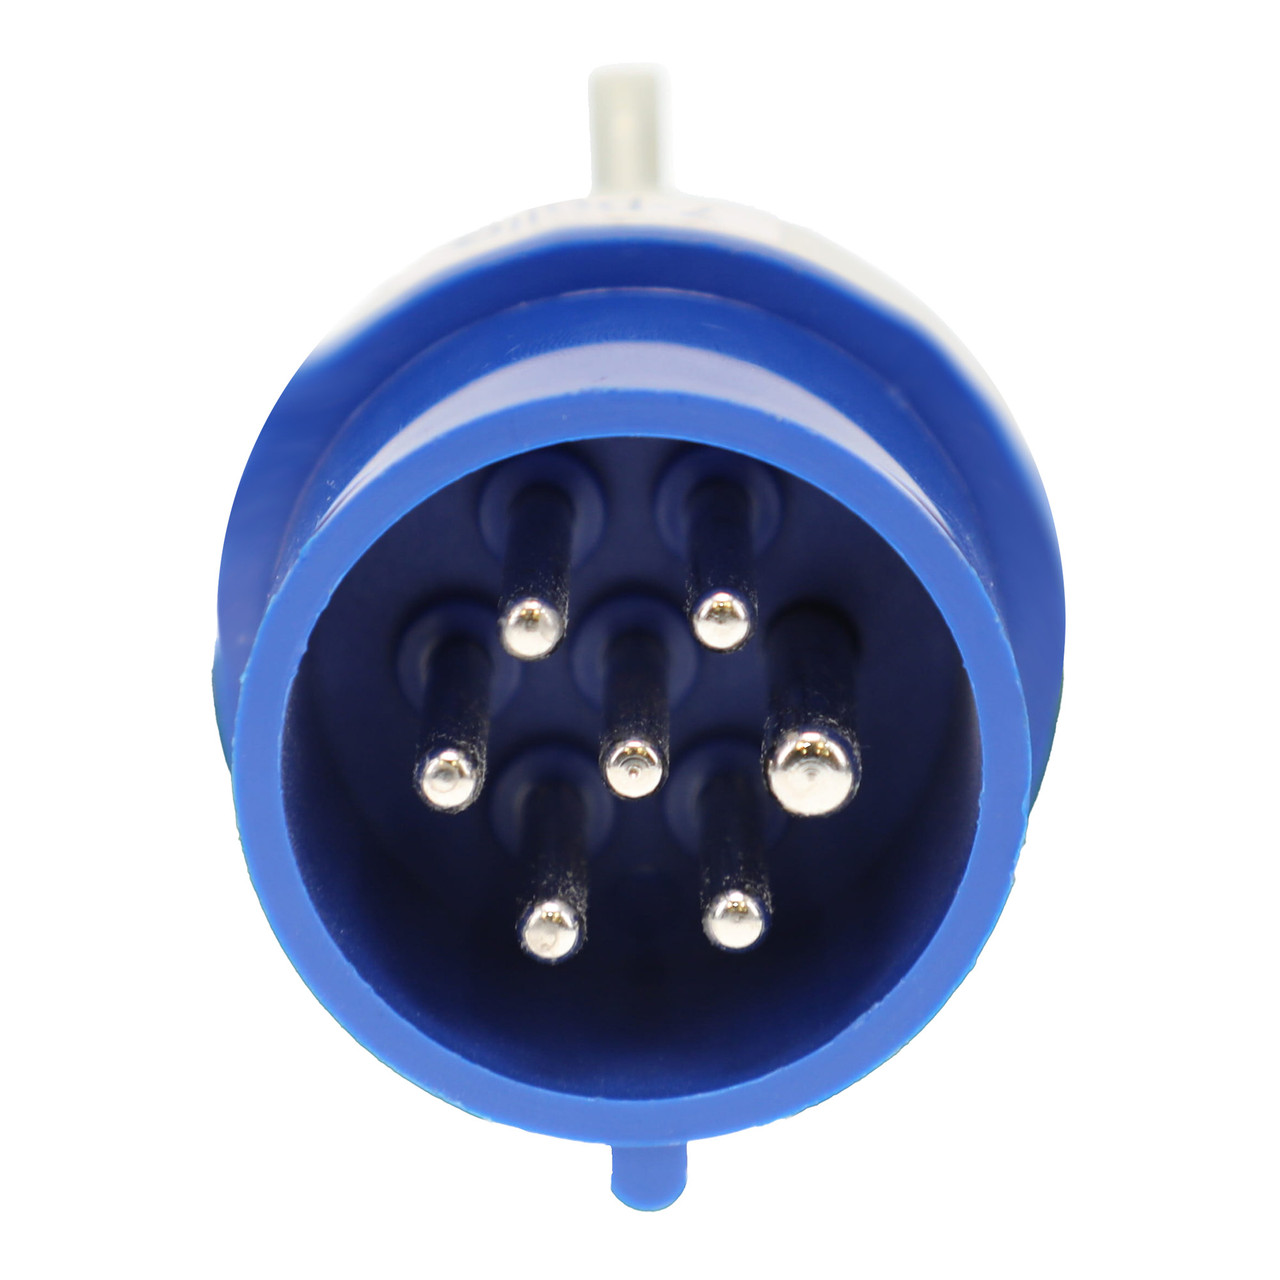 Walther Electric 210709 Pin and Sleeve Plug 16/20A 7 Wire 230/250 VAC  9hr IP44 Splashproof - Industrial Grade IEC (Blue)